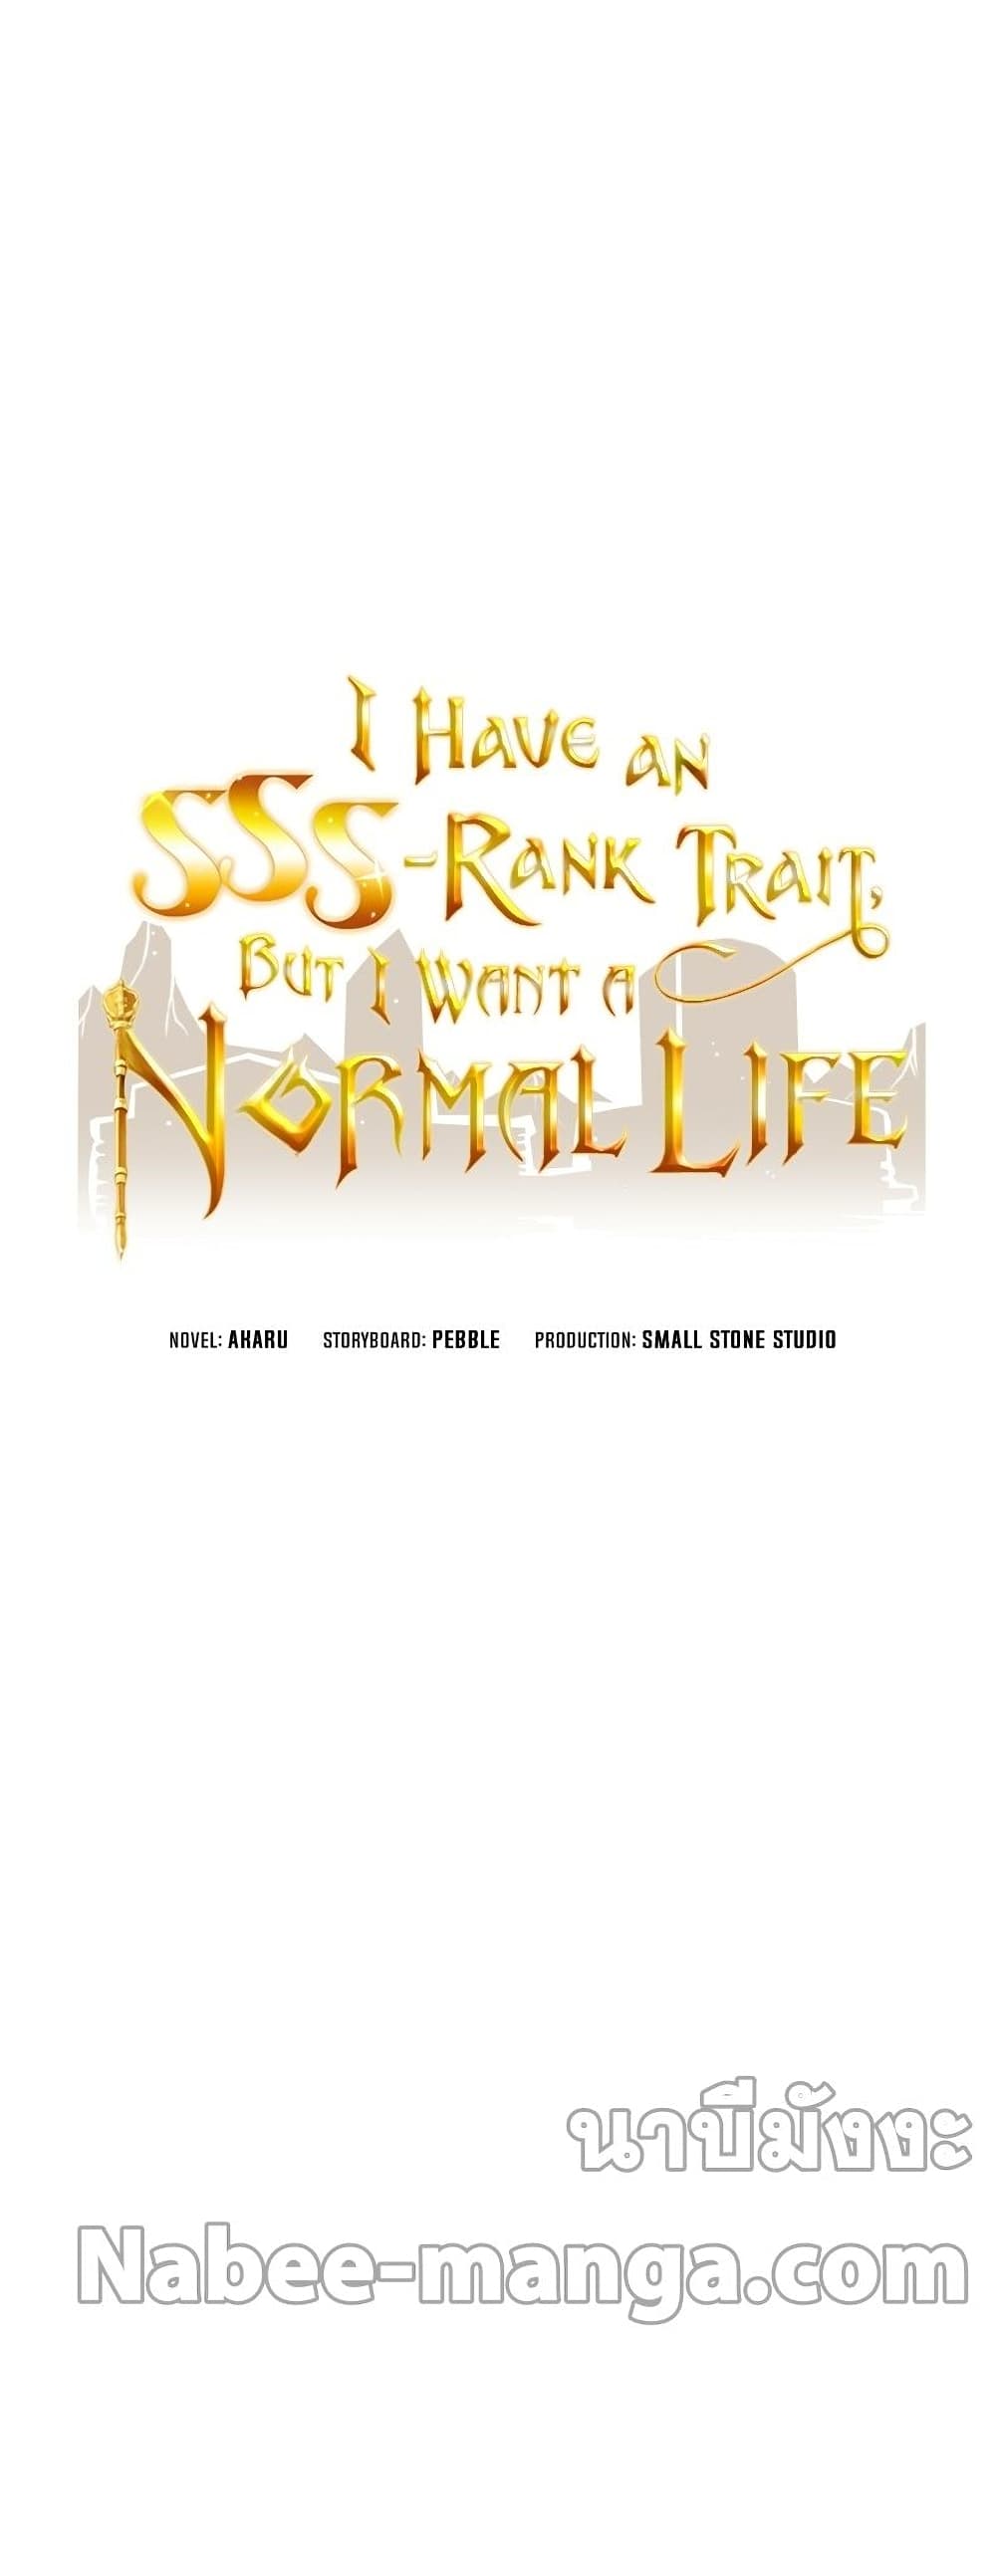 I Have an SSS-Rank Trait, But I Want a Normal Life 30-30